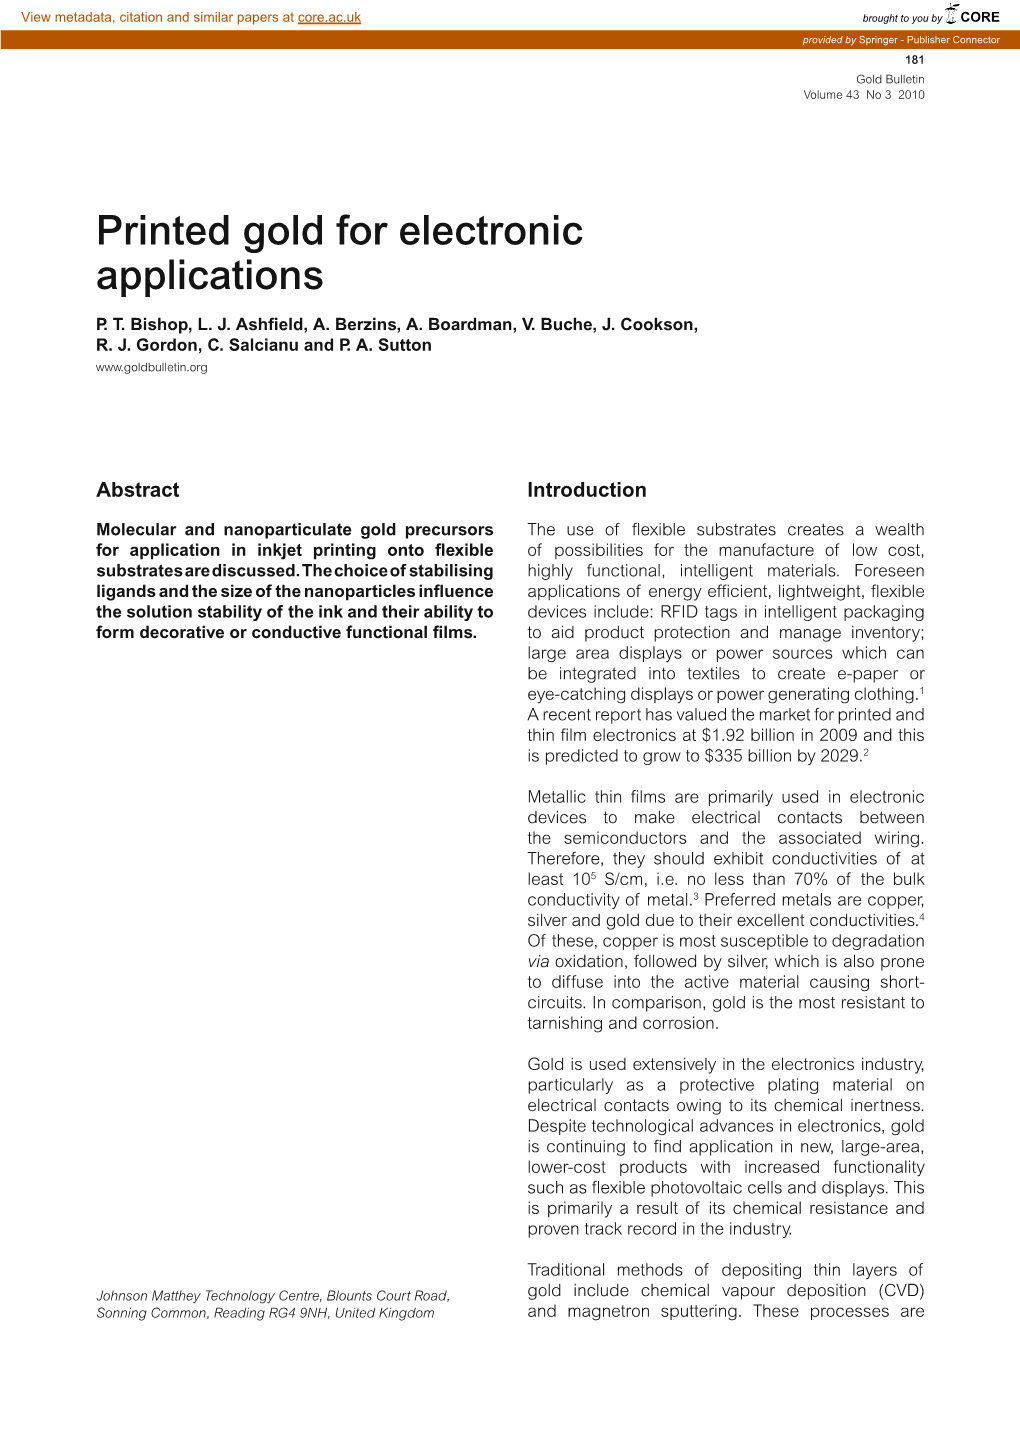 Printed Gold for Electronic Applications